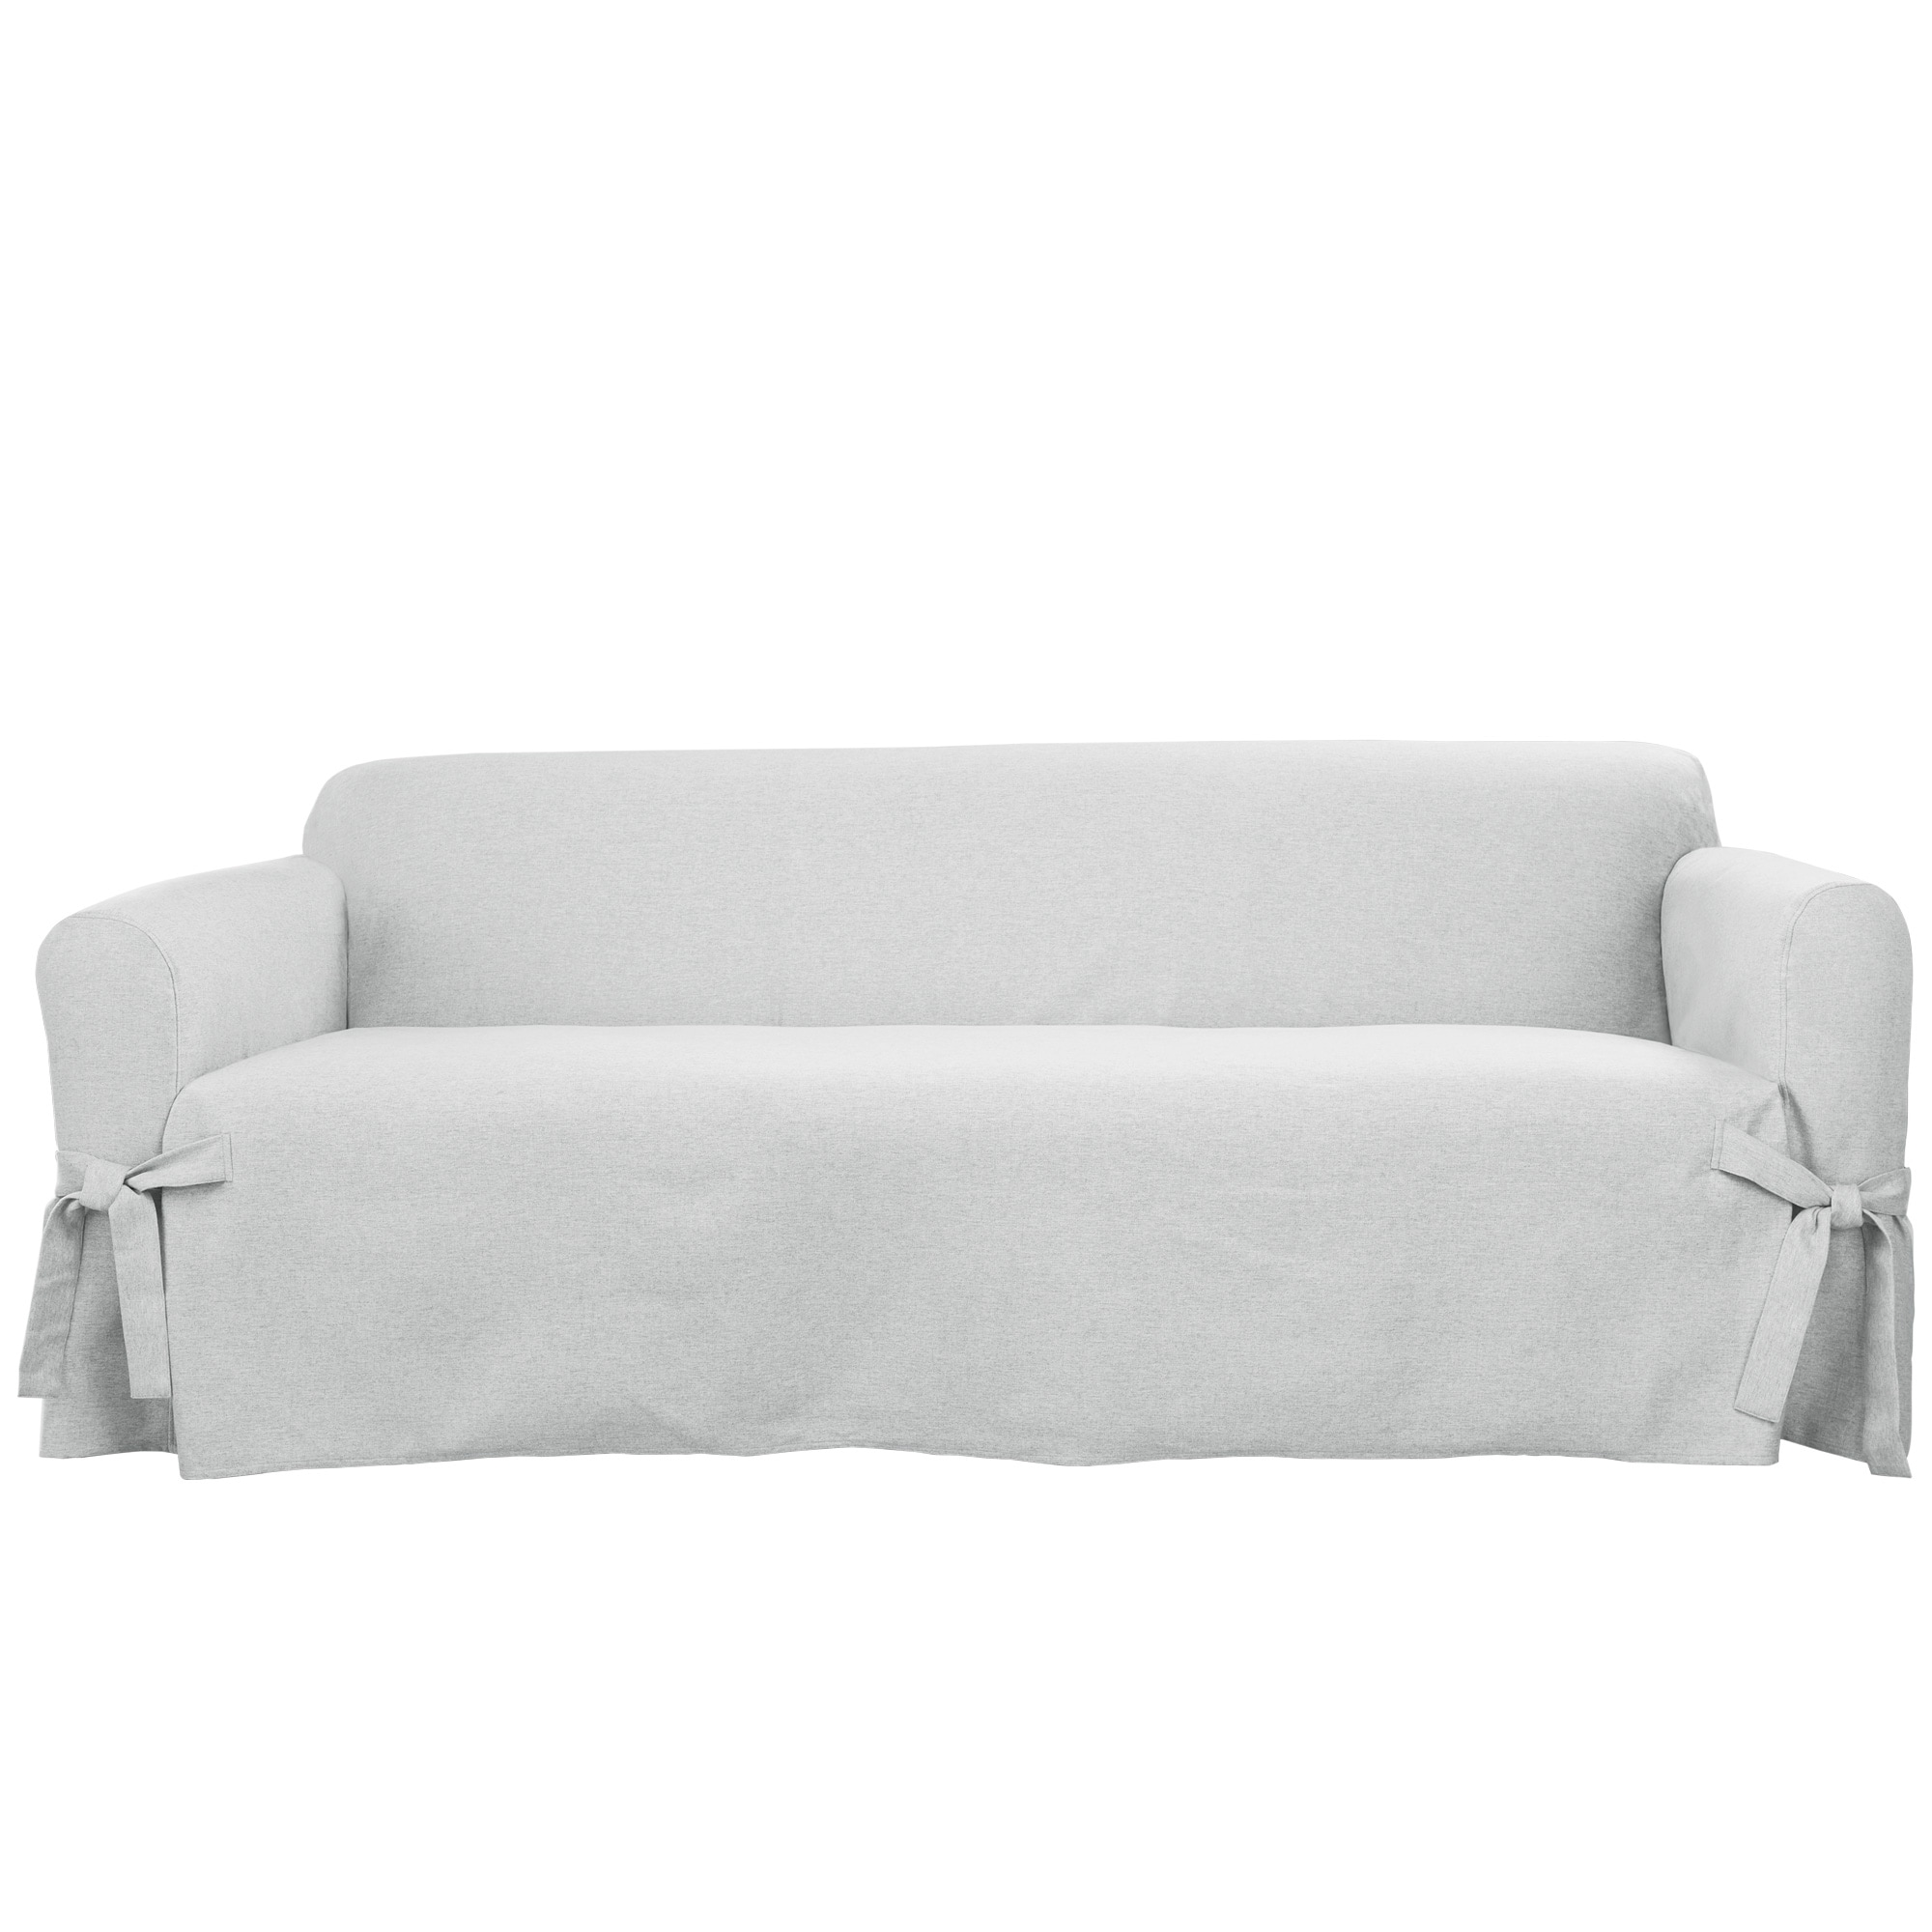 SureFit Farmhouse Basketweave One Piece Sofa Slipcover with Ties - On Sale  - Overstock - 34208525